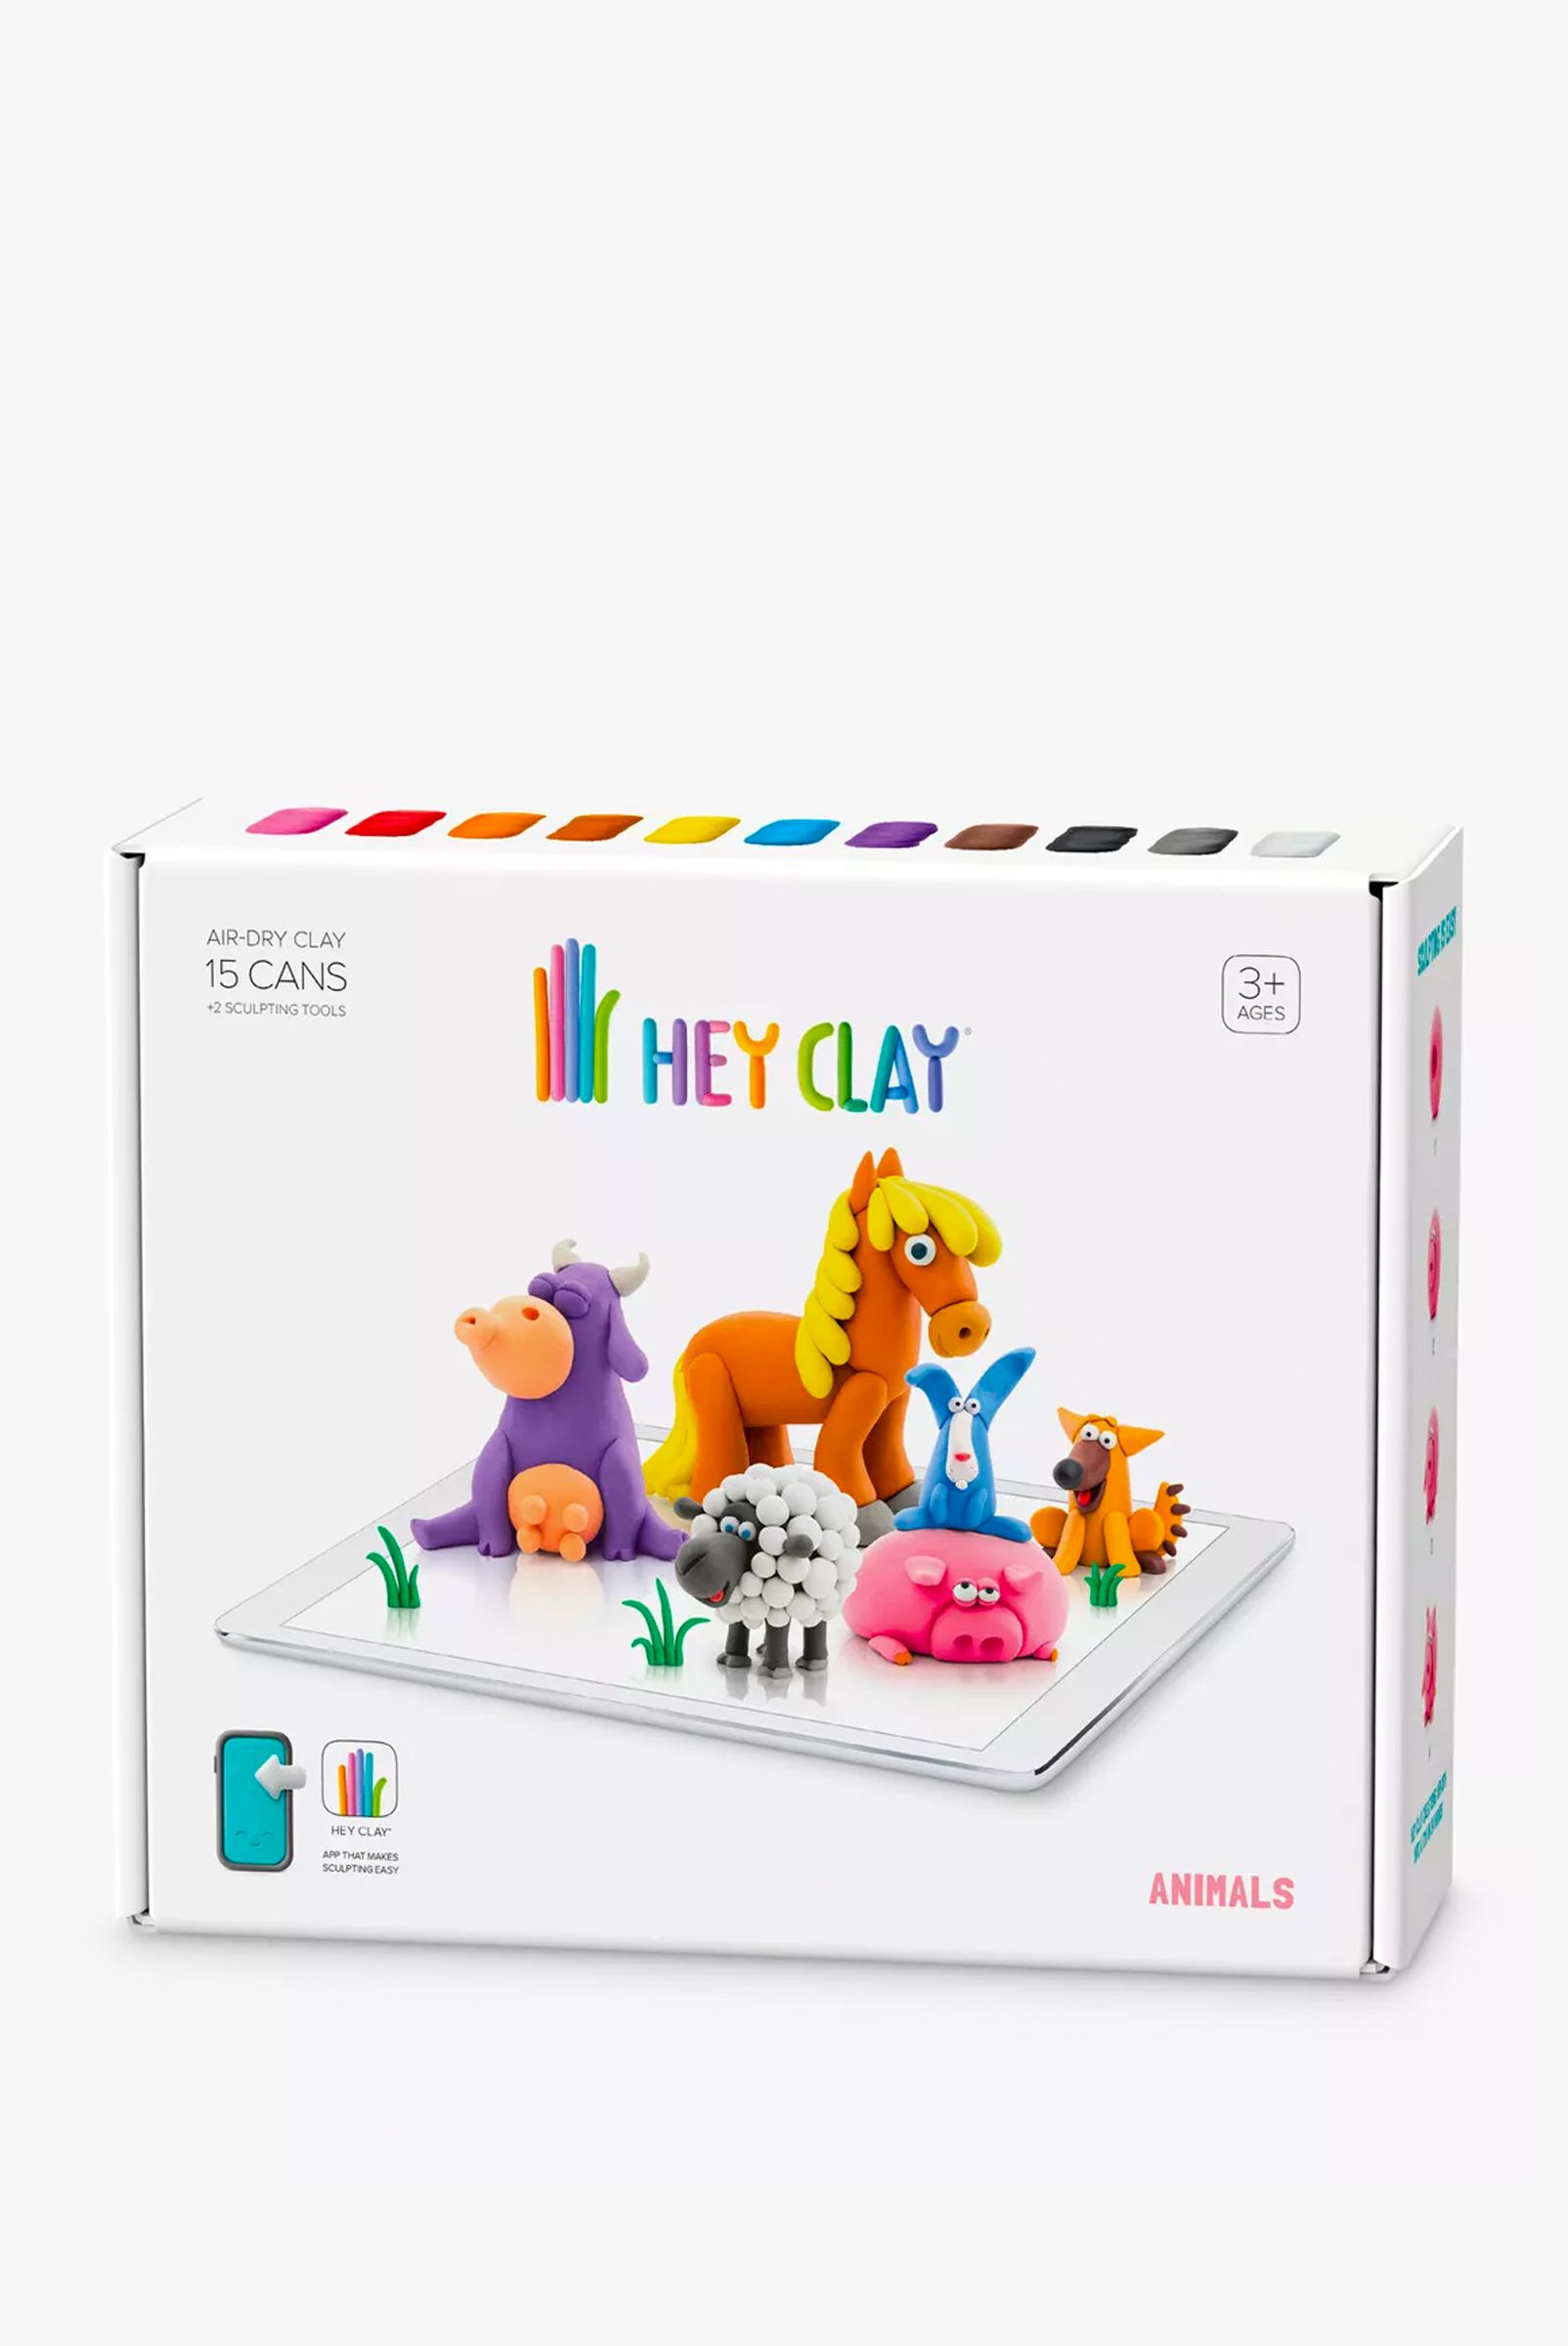 Air Dry Clay TOMY Hey Clay Modelling Kit - Animals, £14.99